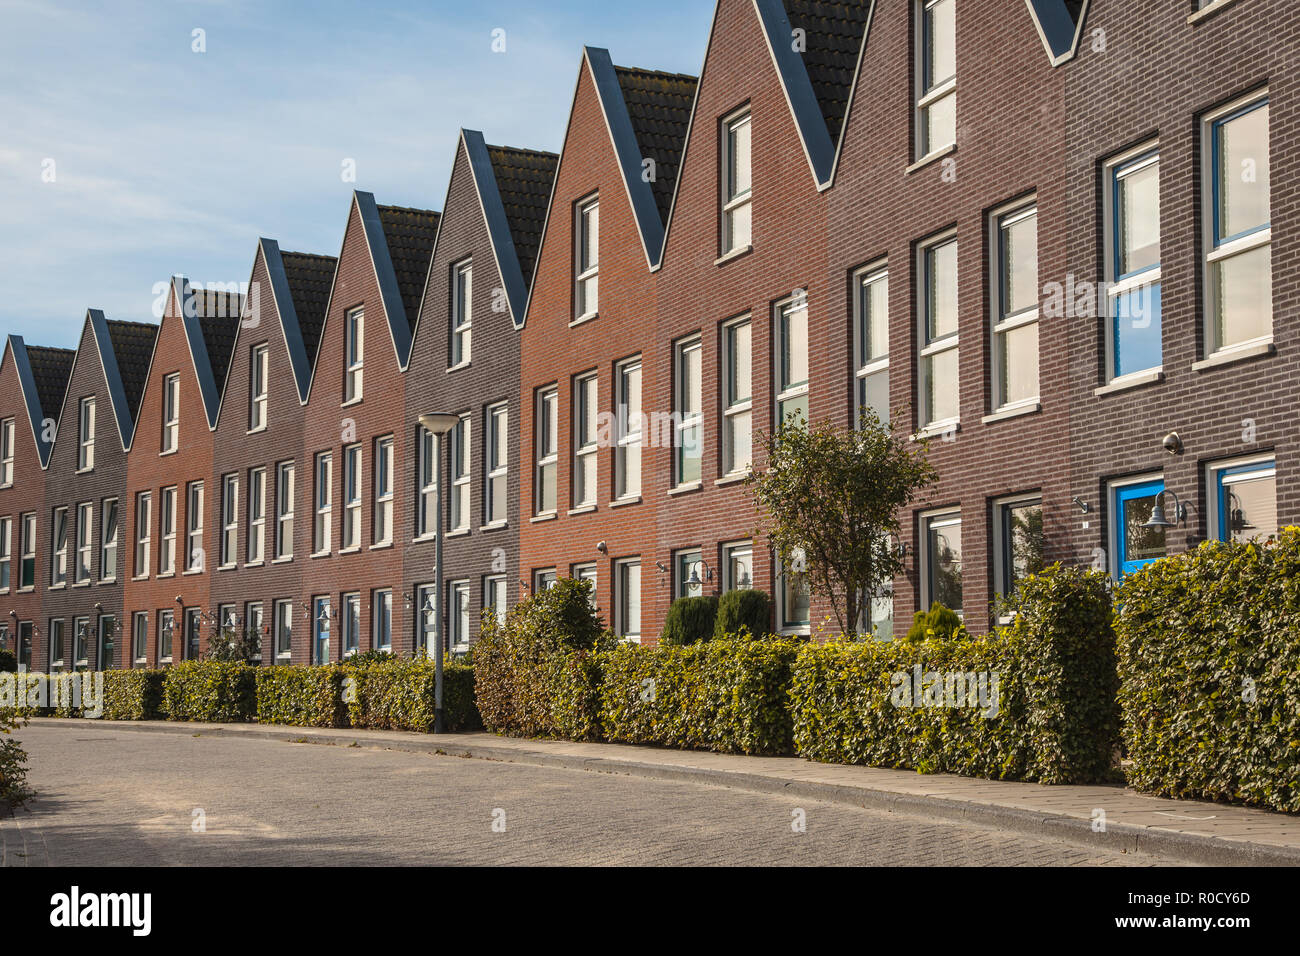 Row of Uniform Family House in a Quiet Street in the Netherlands Stock Photo